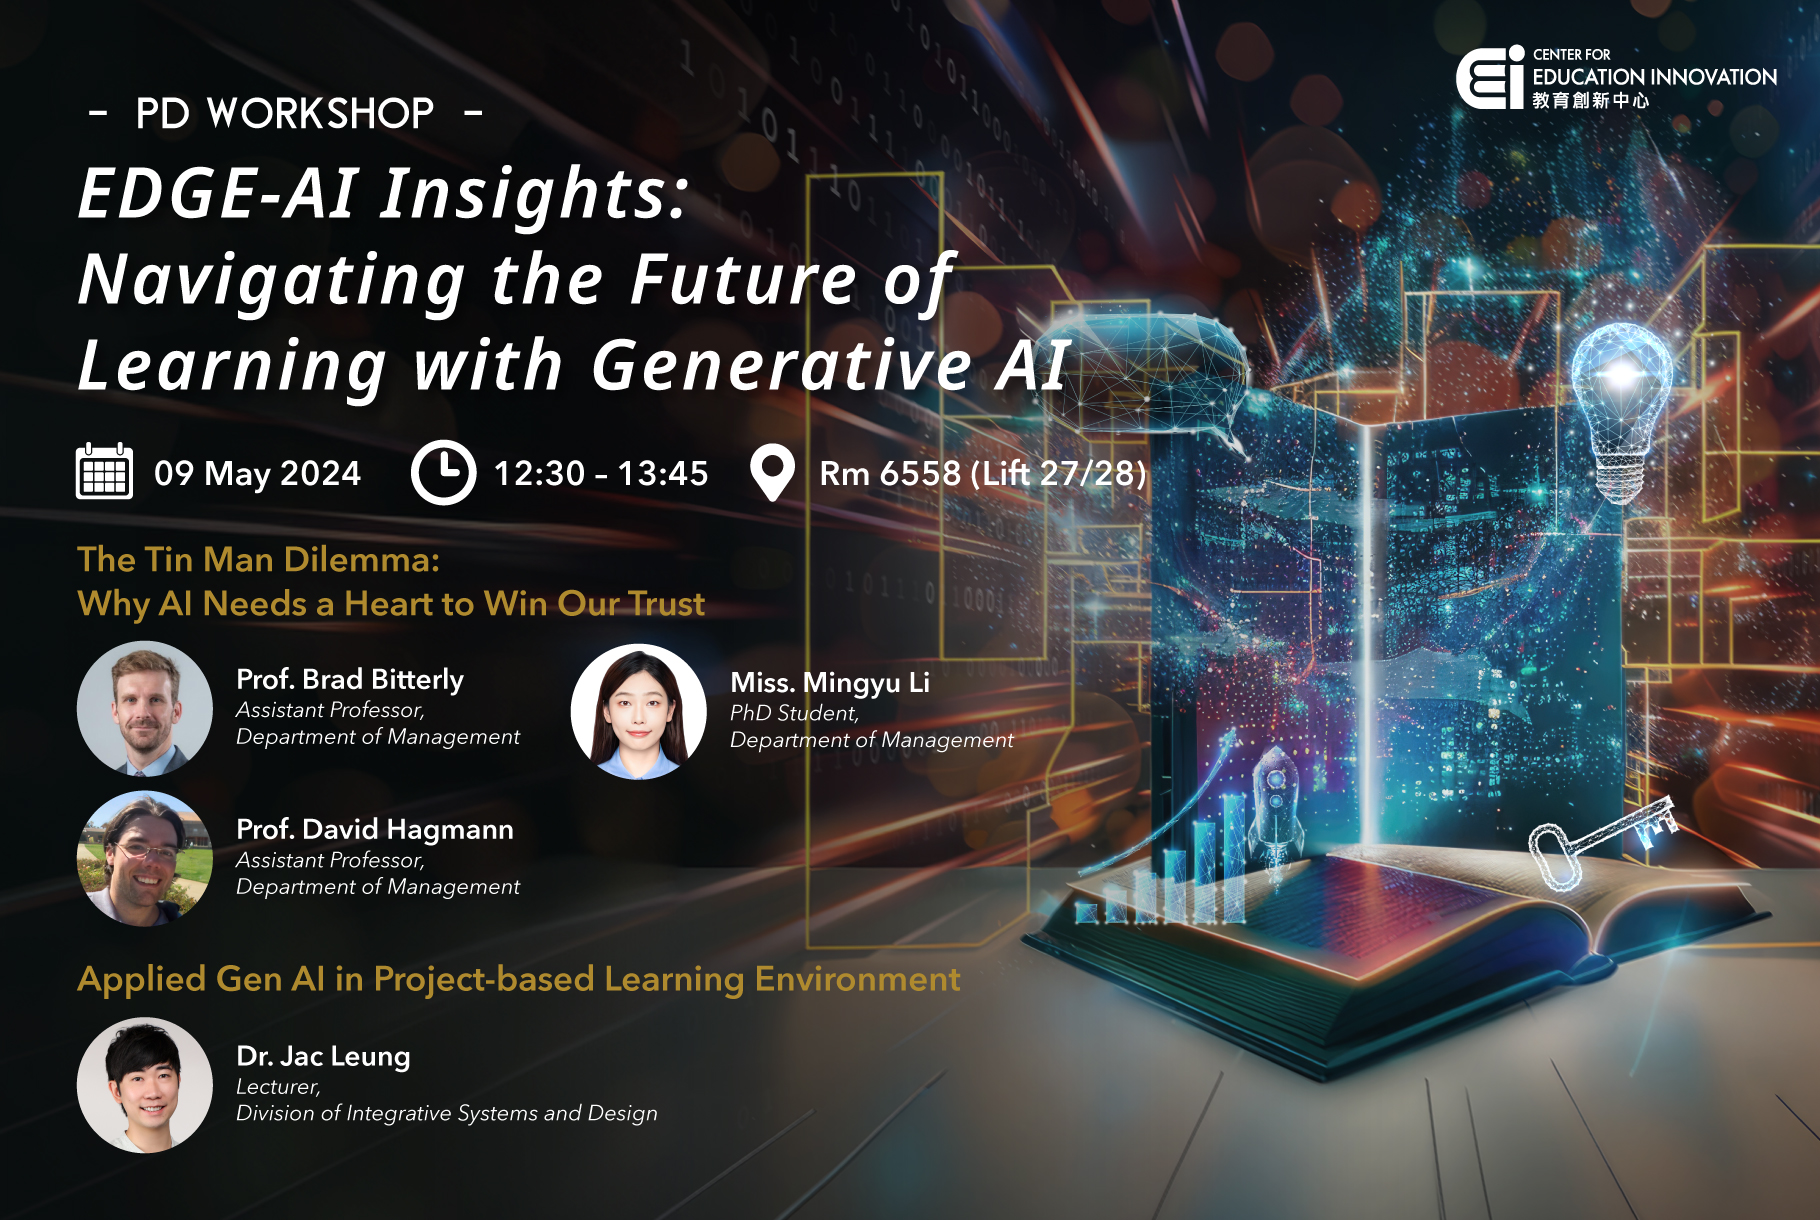 EDGE-AI Insights: Navigating the Future of Learning with Generative AI